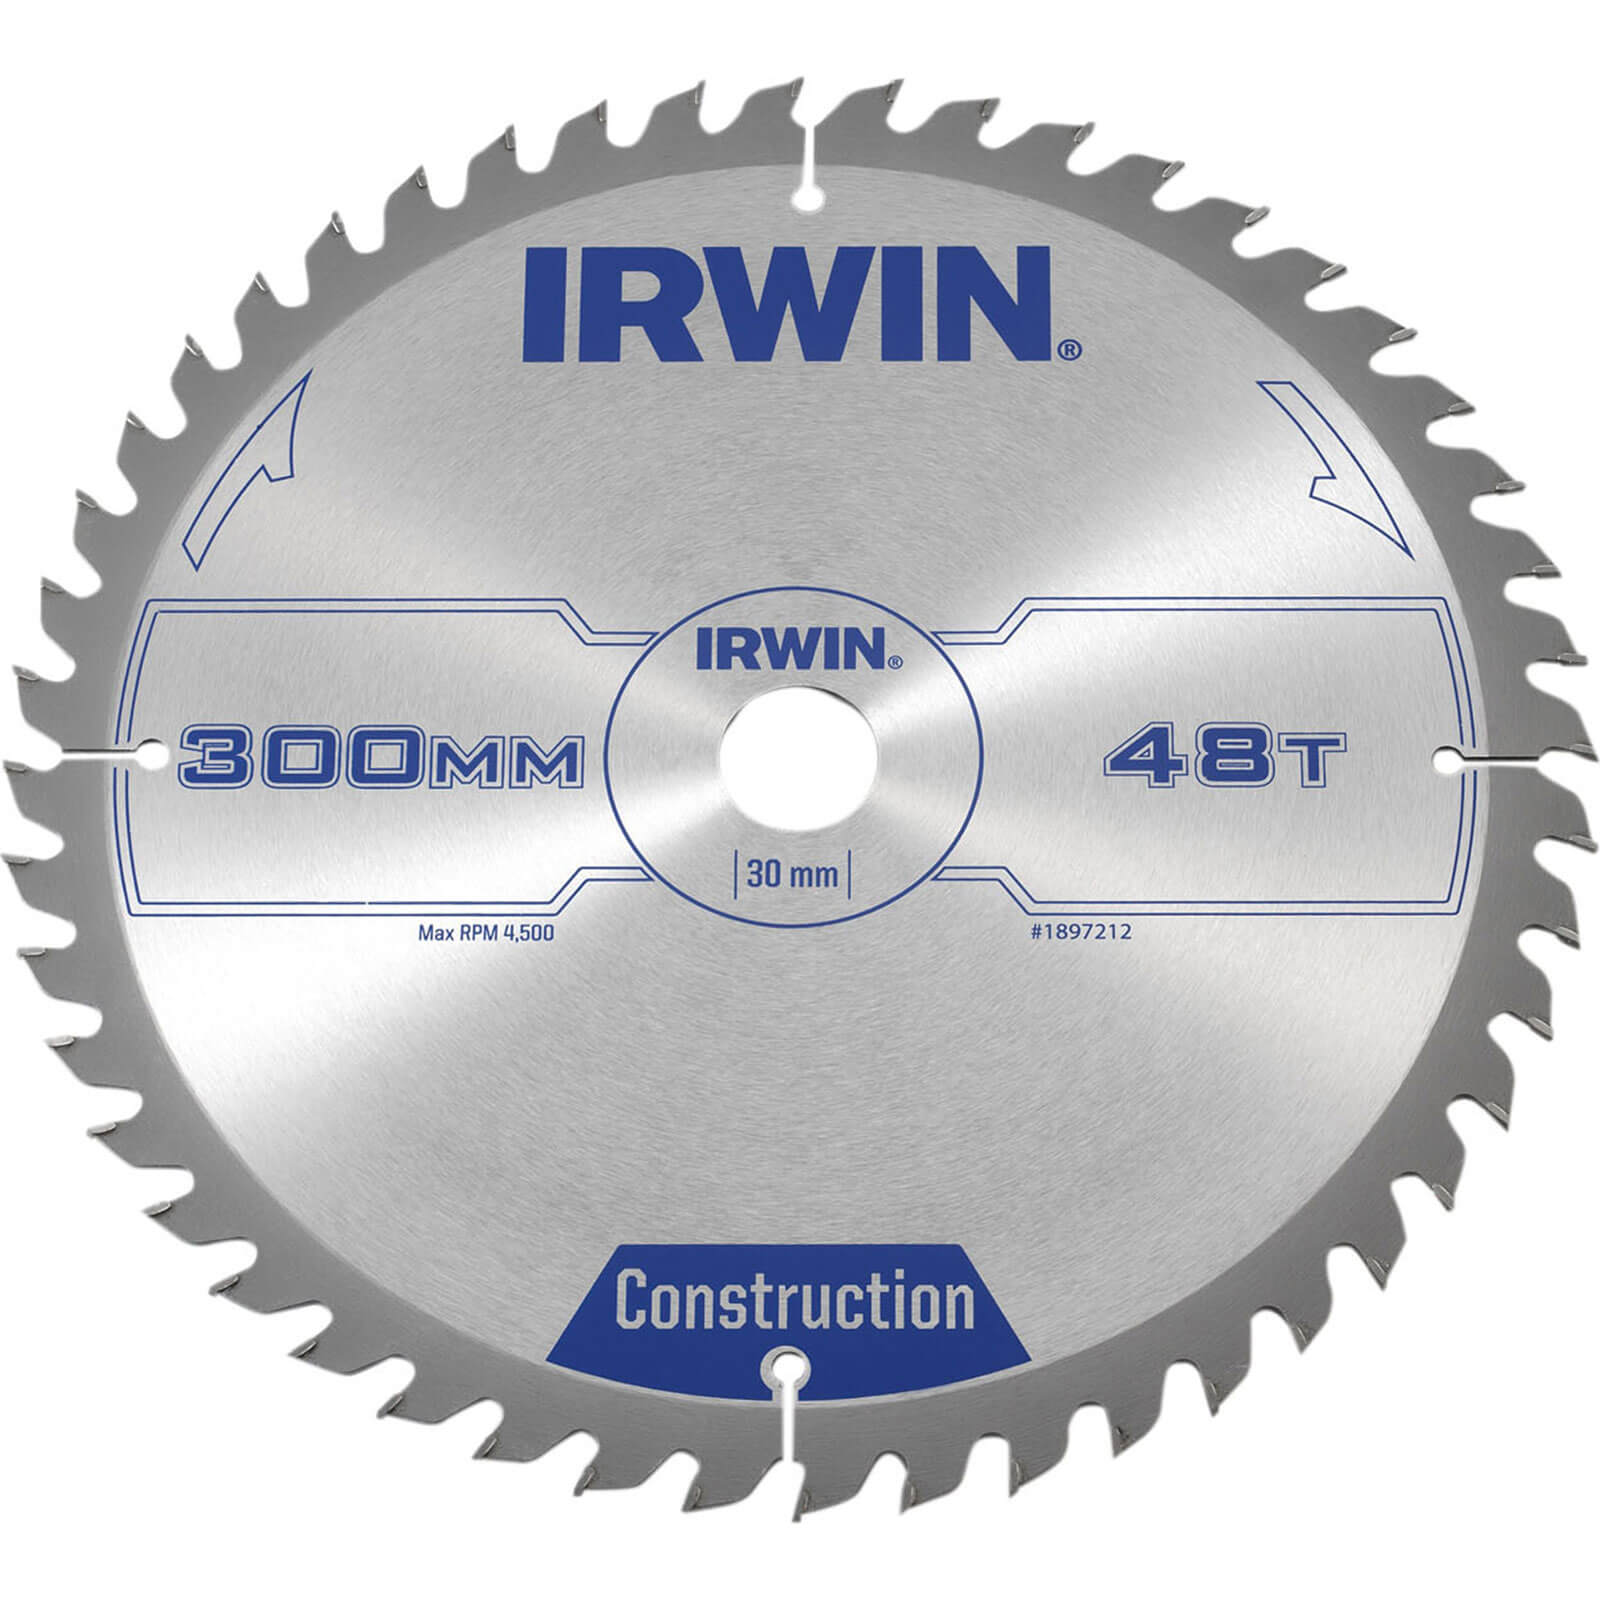 Image of Irwin ATB Construction Circular Saw Blade 300mm 48T 30mm